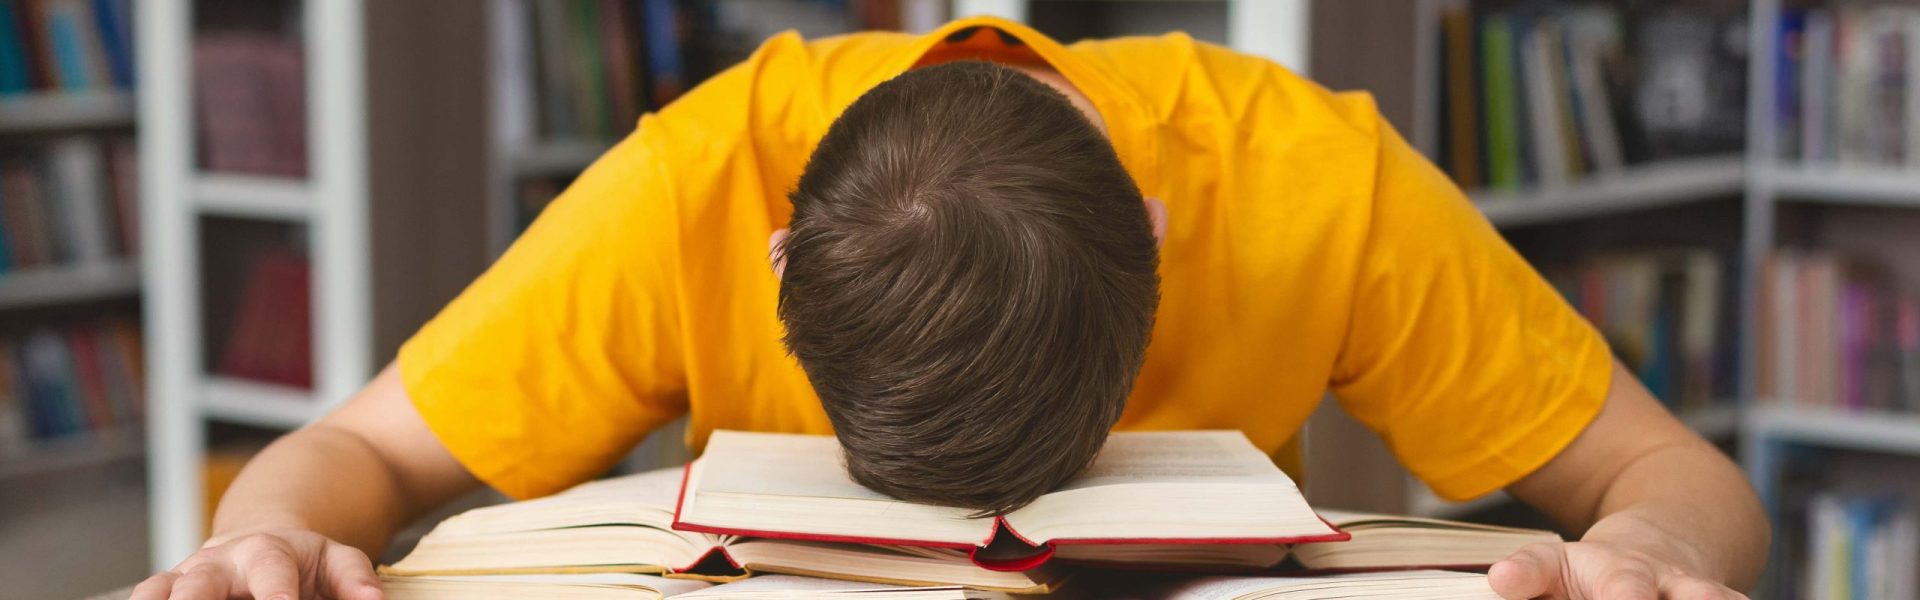 Student is sleeping on book